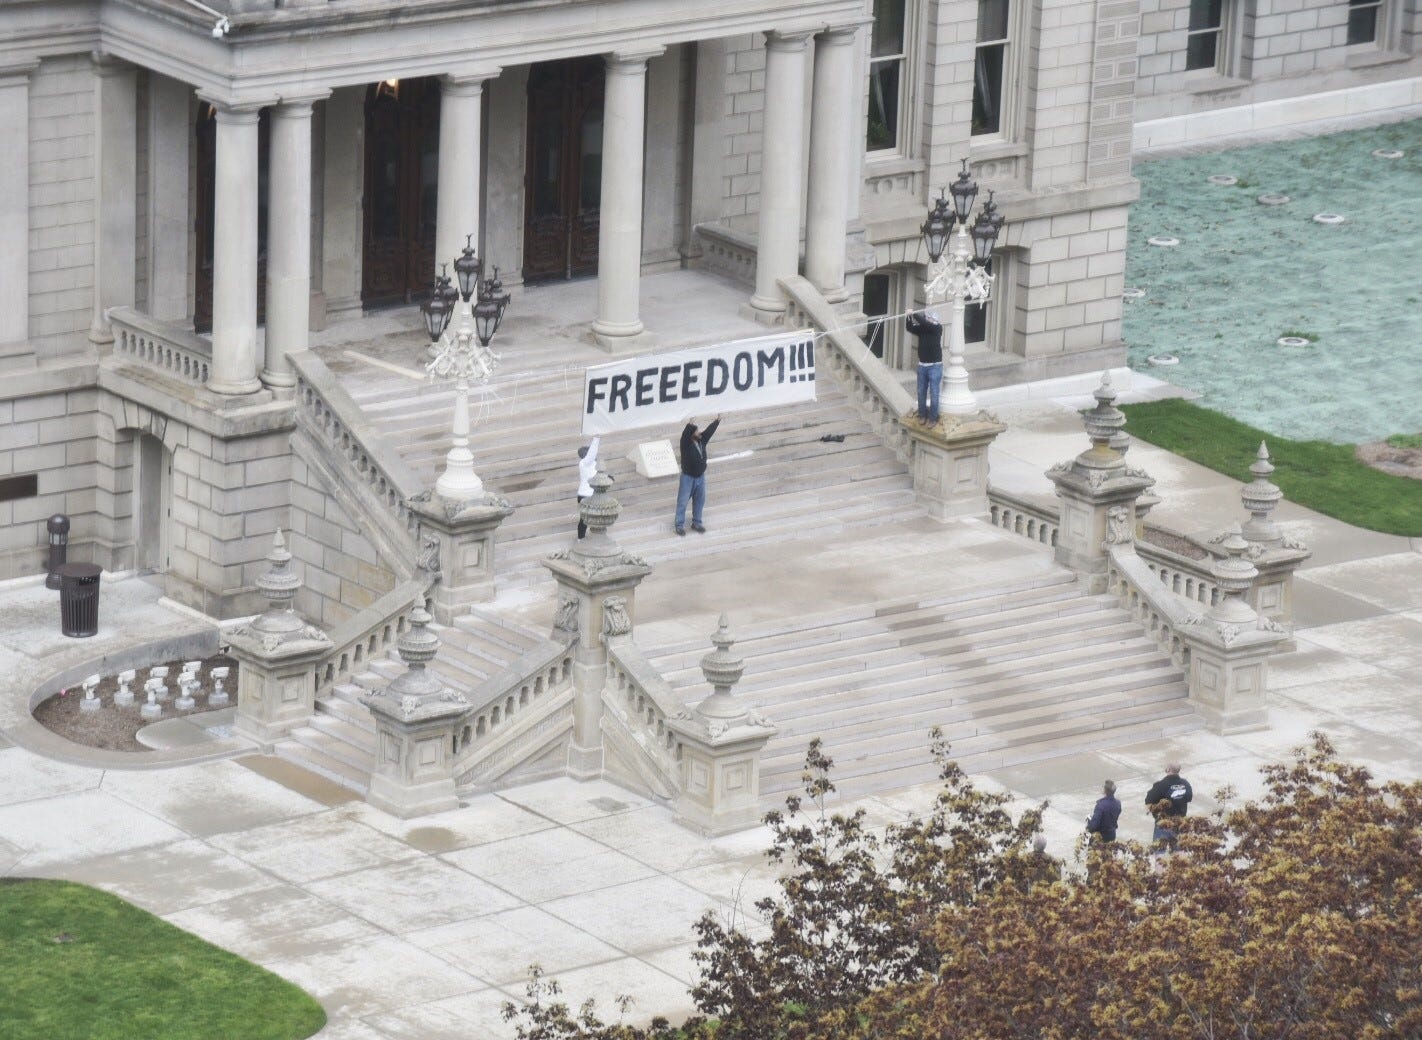 Protesters in Lansing get an early start on Thursday, May 14, 2020, demonstrations by hanging a sign above the Capitol stairs.